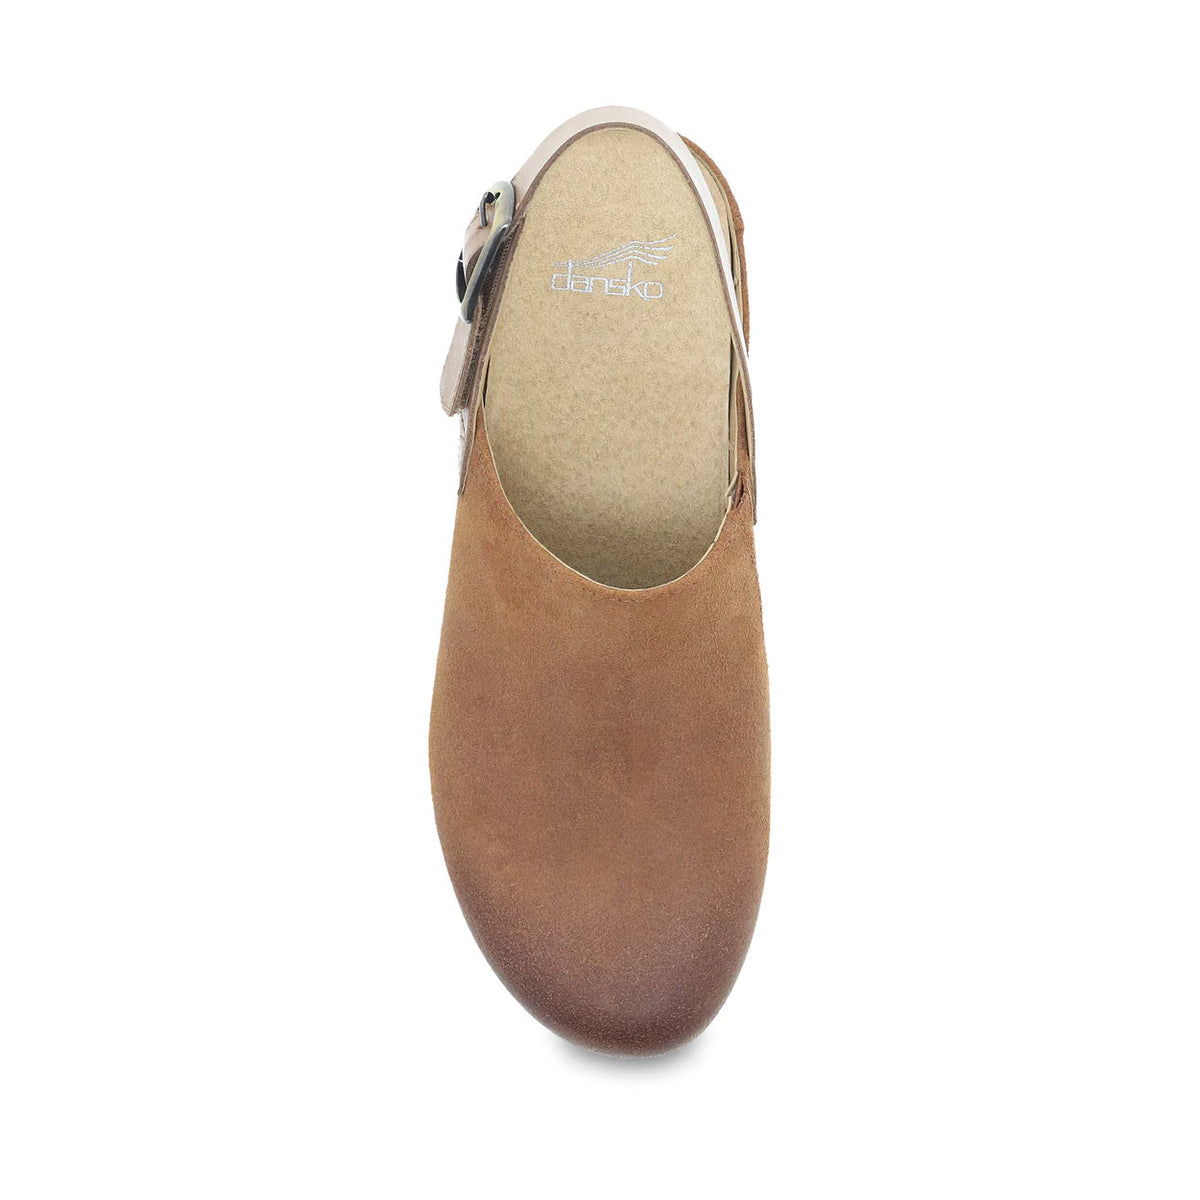 Top view of a single brown suede mary jane shoe with a heel strap, displaying the Dansko logo on the insole.